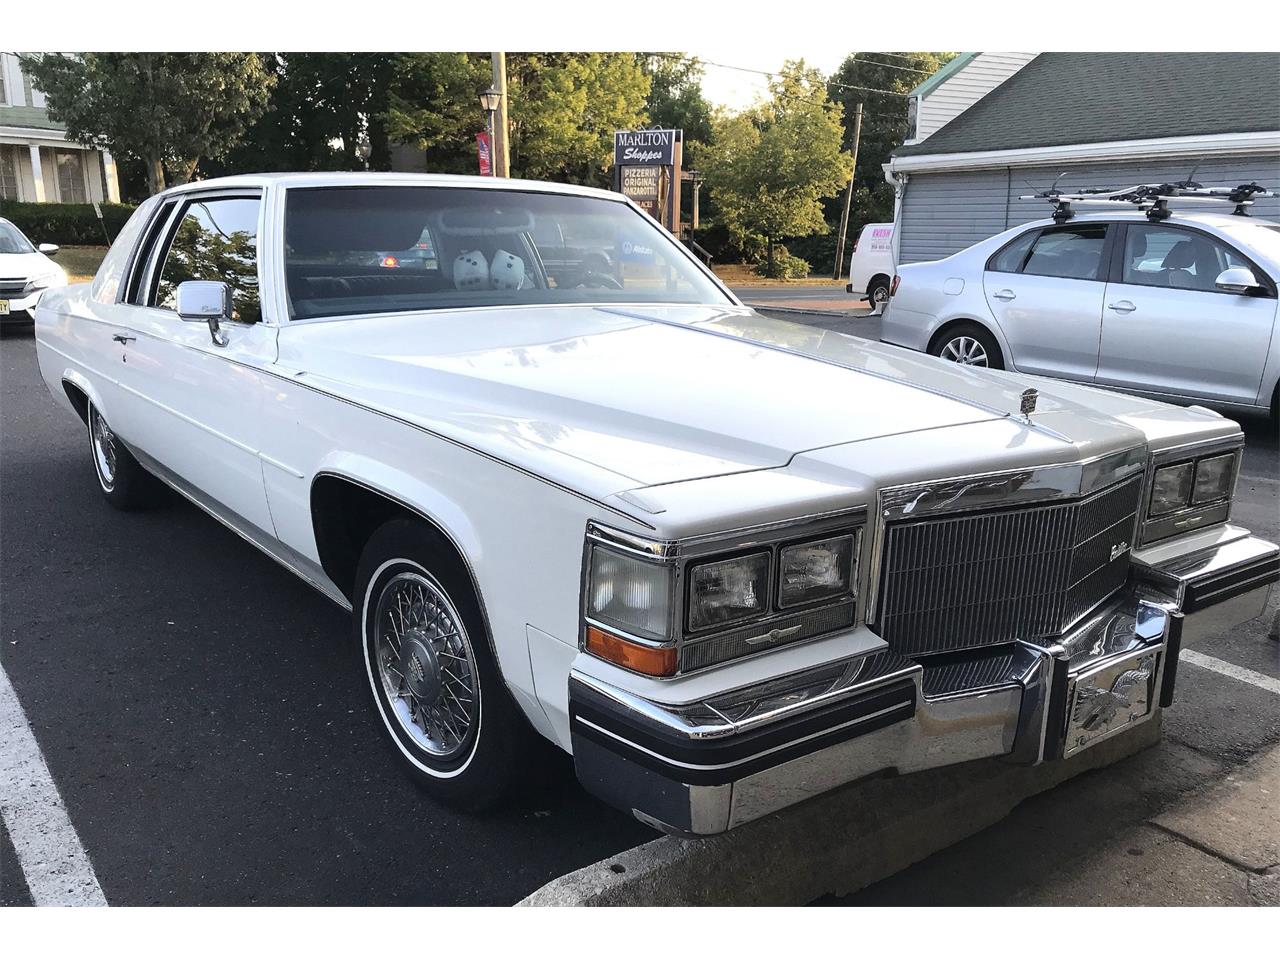 1984 cadillac coupe deville for sale classiccars com cc 1171622 1984 cadillac coupe deville for sale